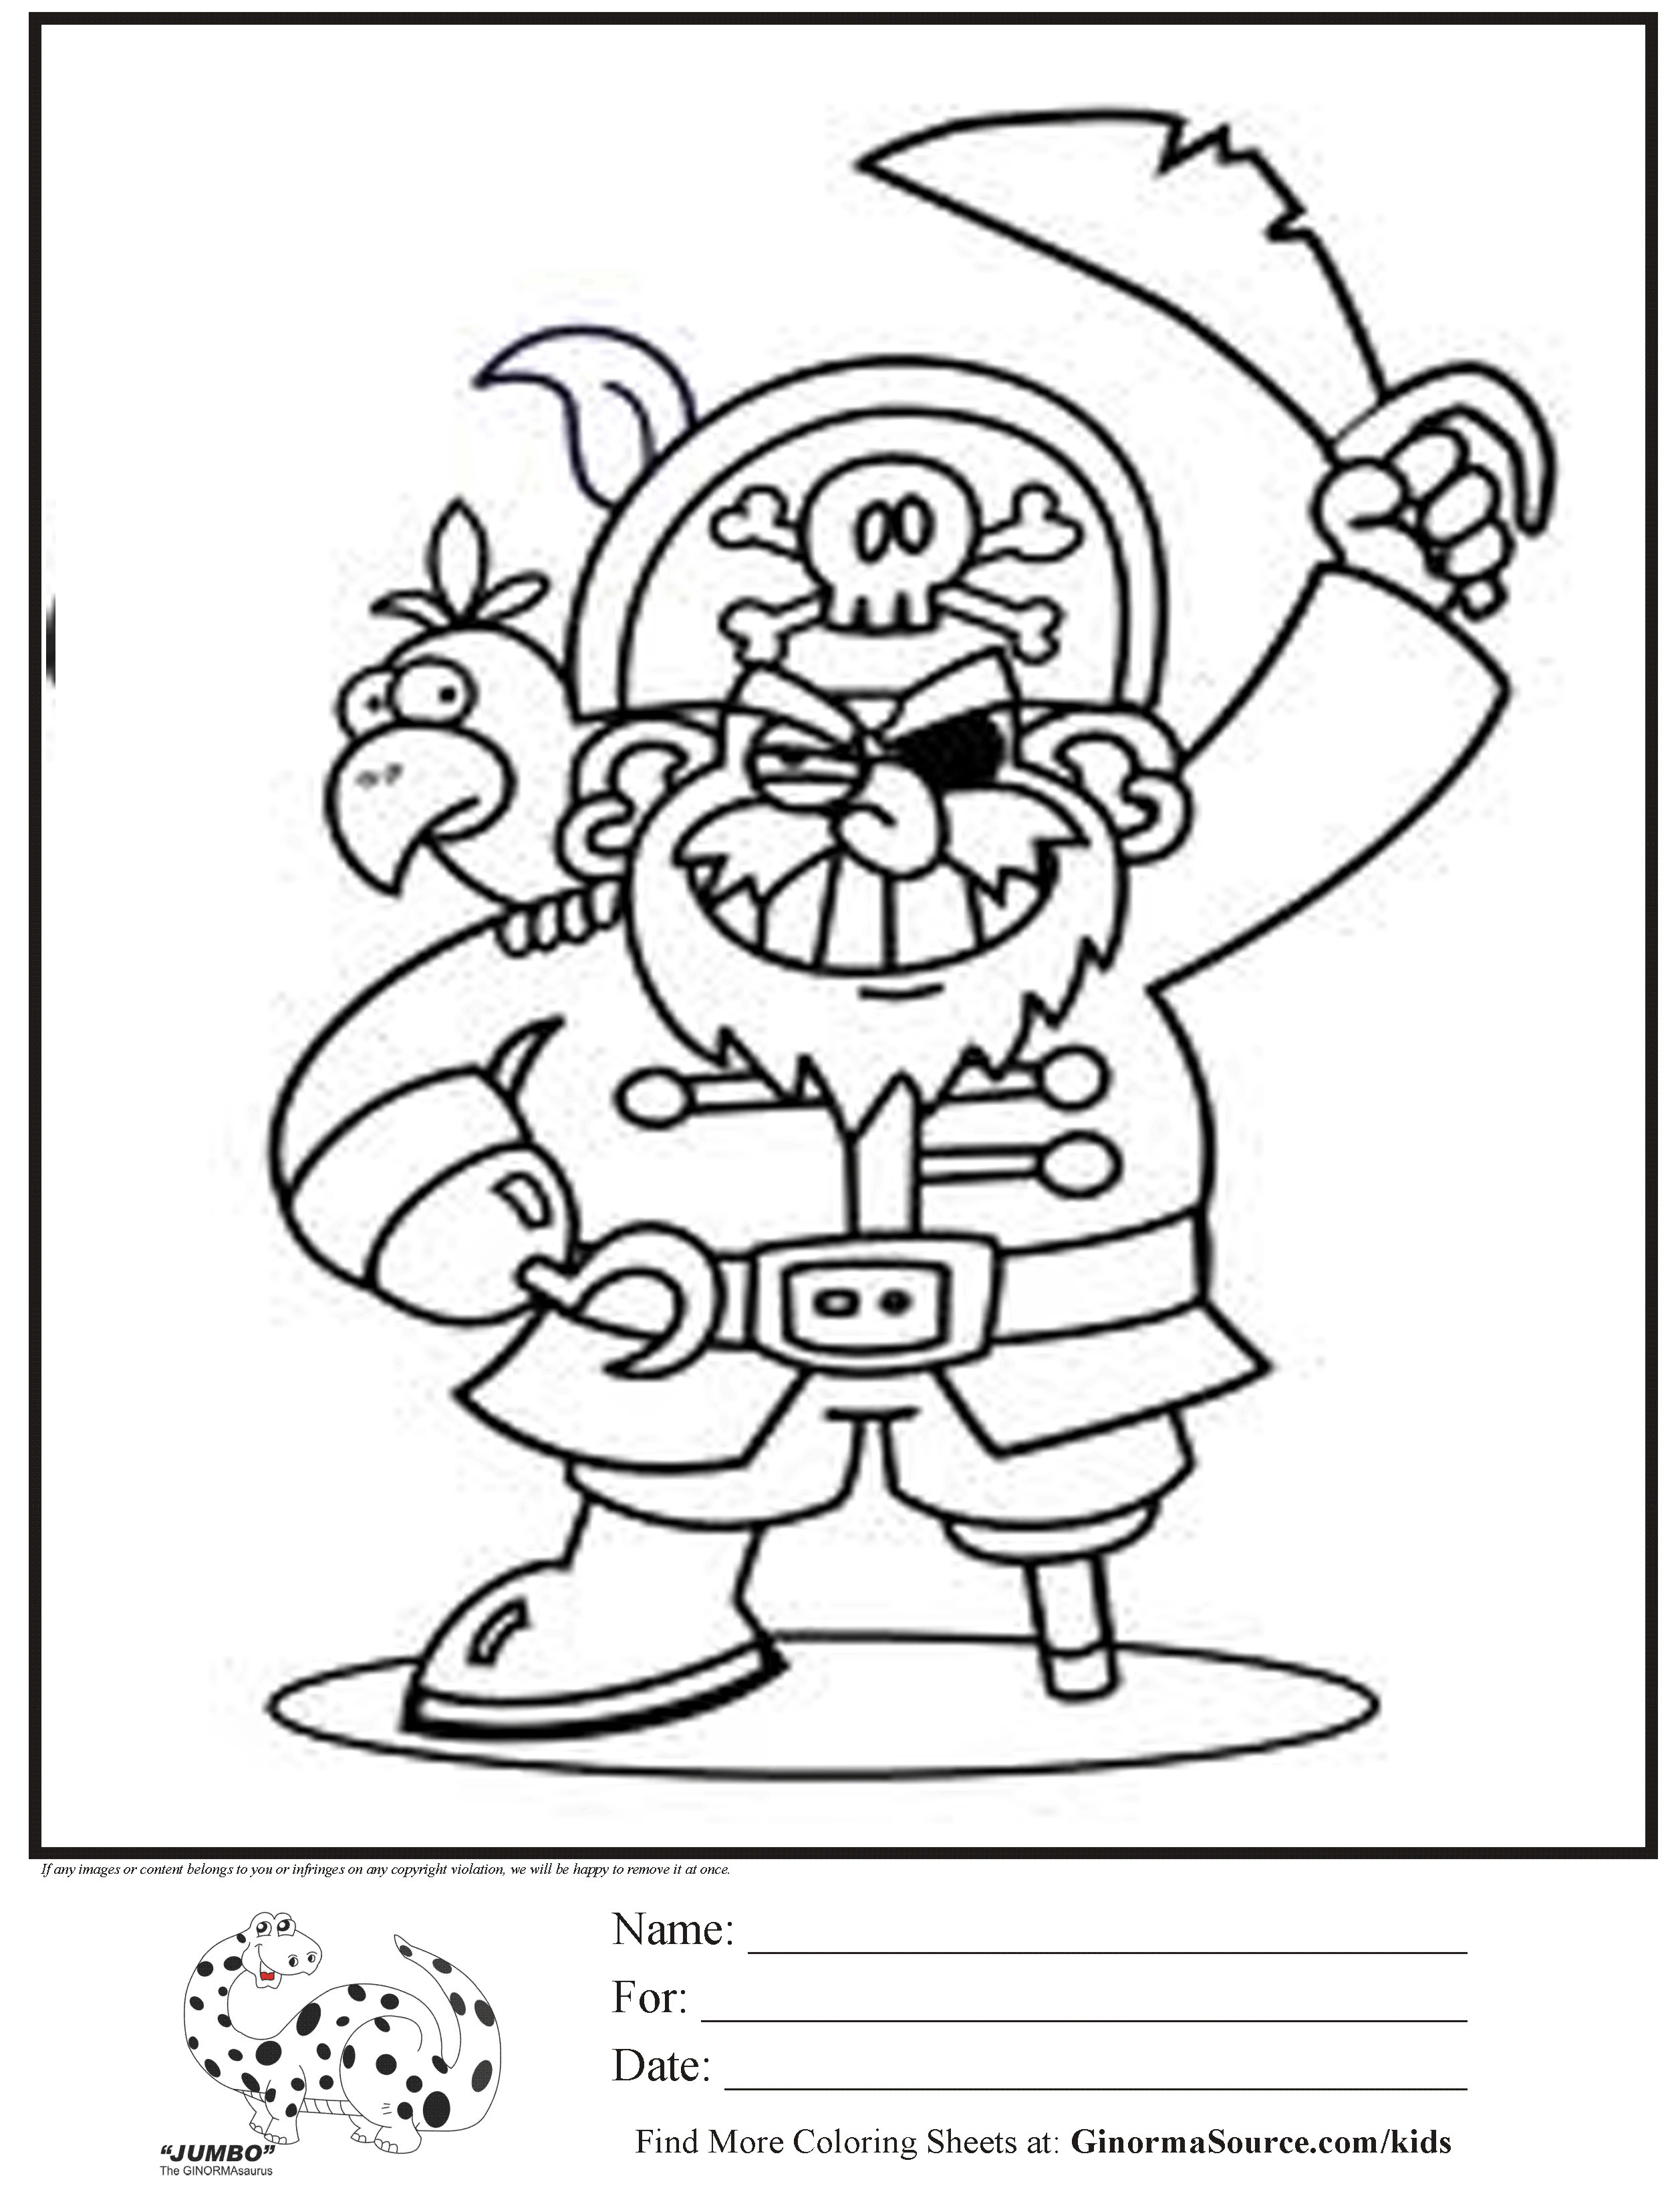 pirates coloring pages - High Quality Coloring Pages